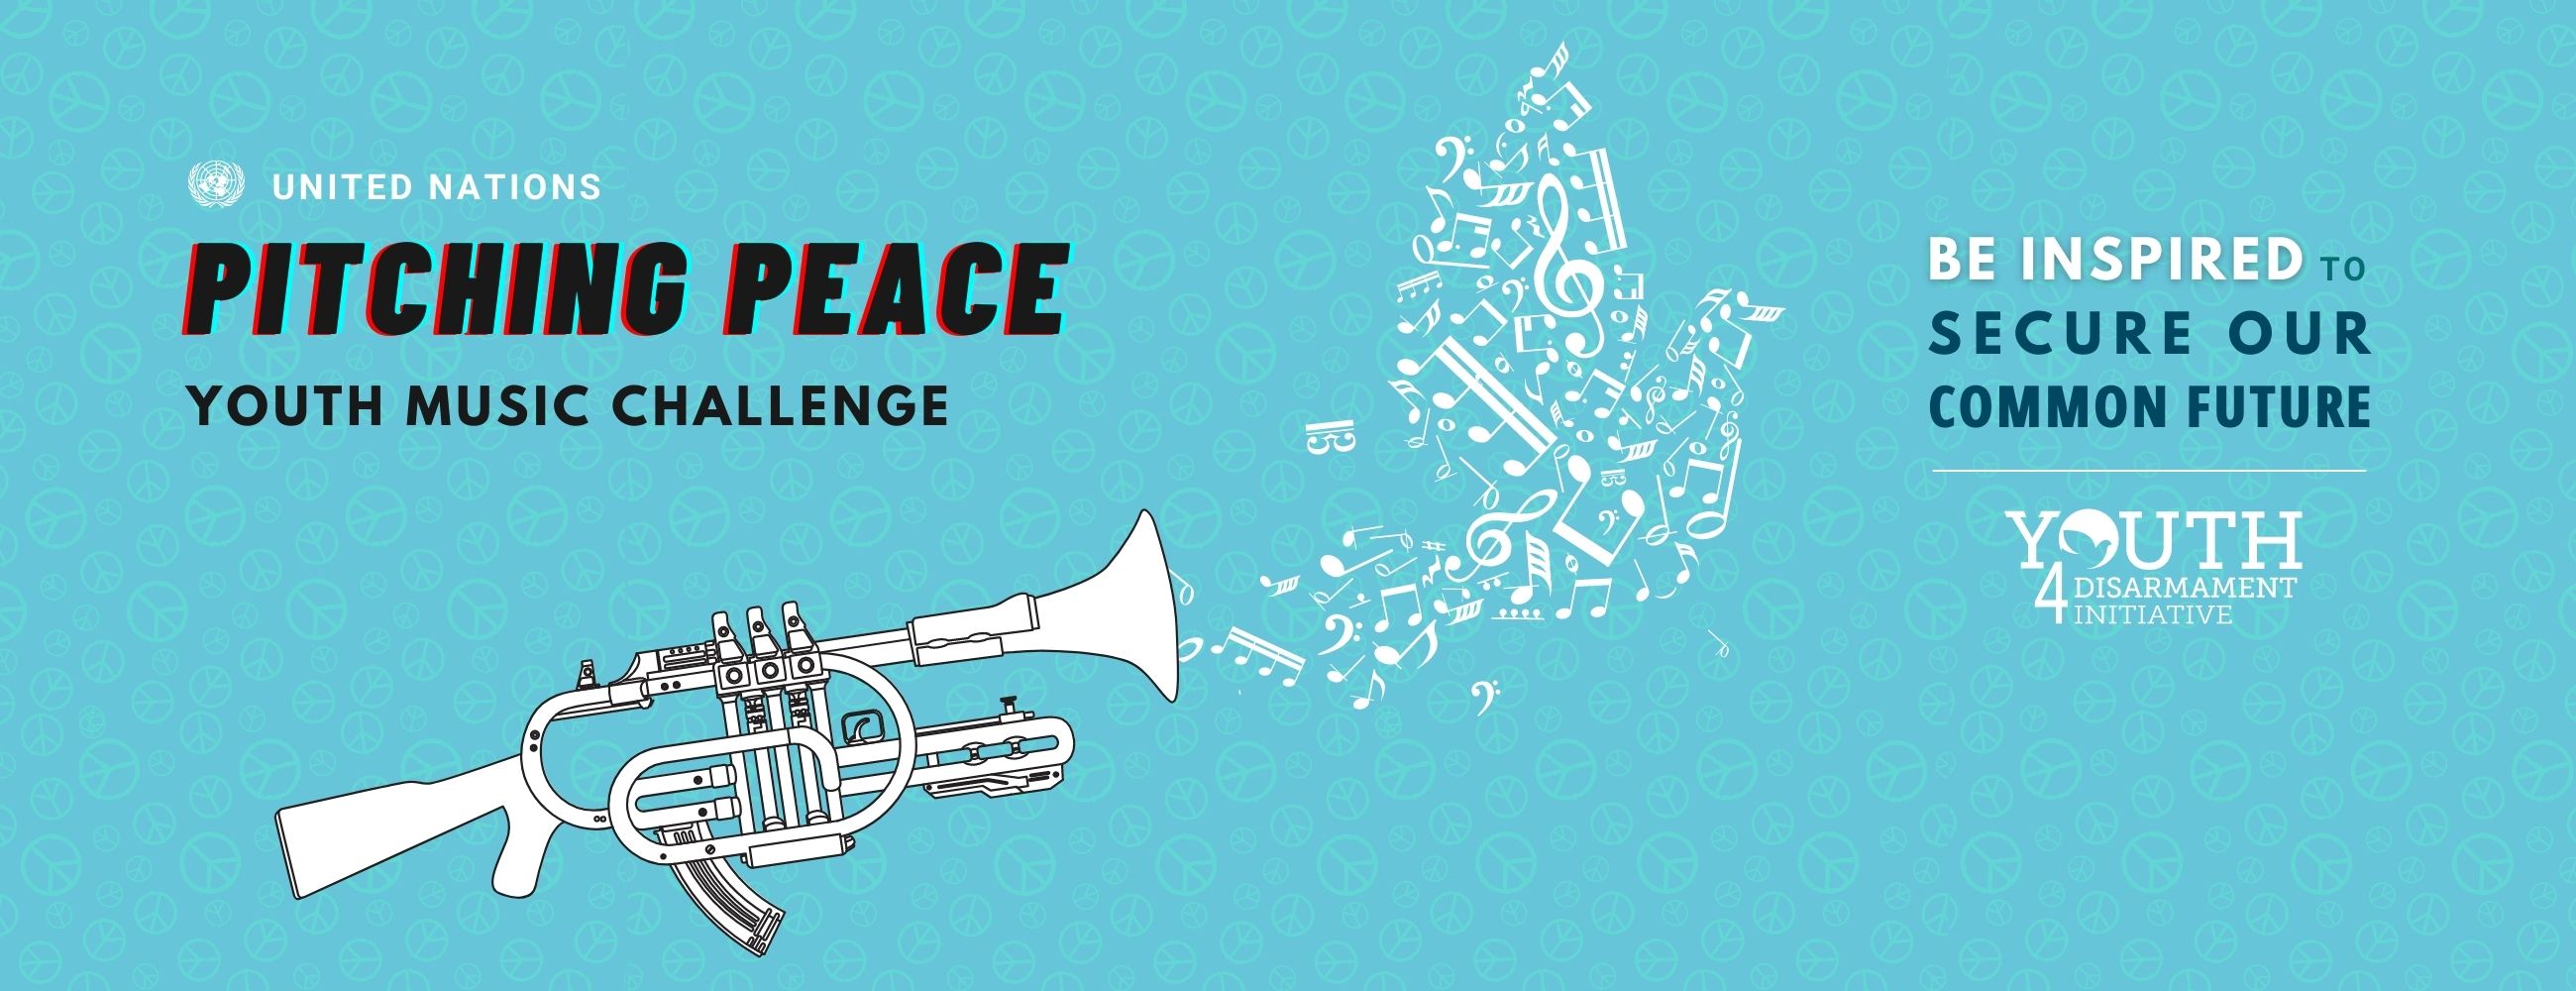 Pitching Peace Youth Music Contest